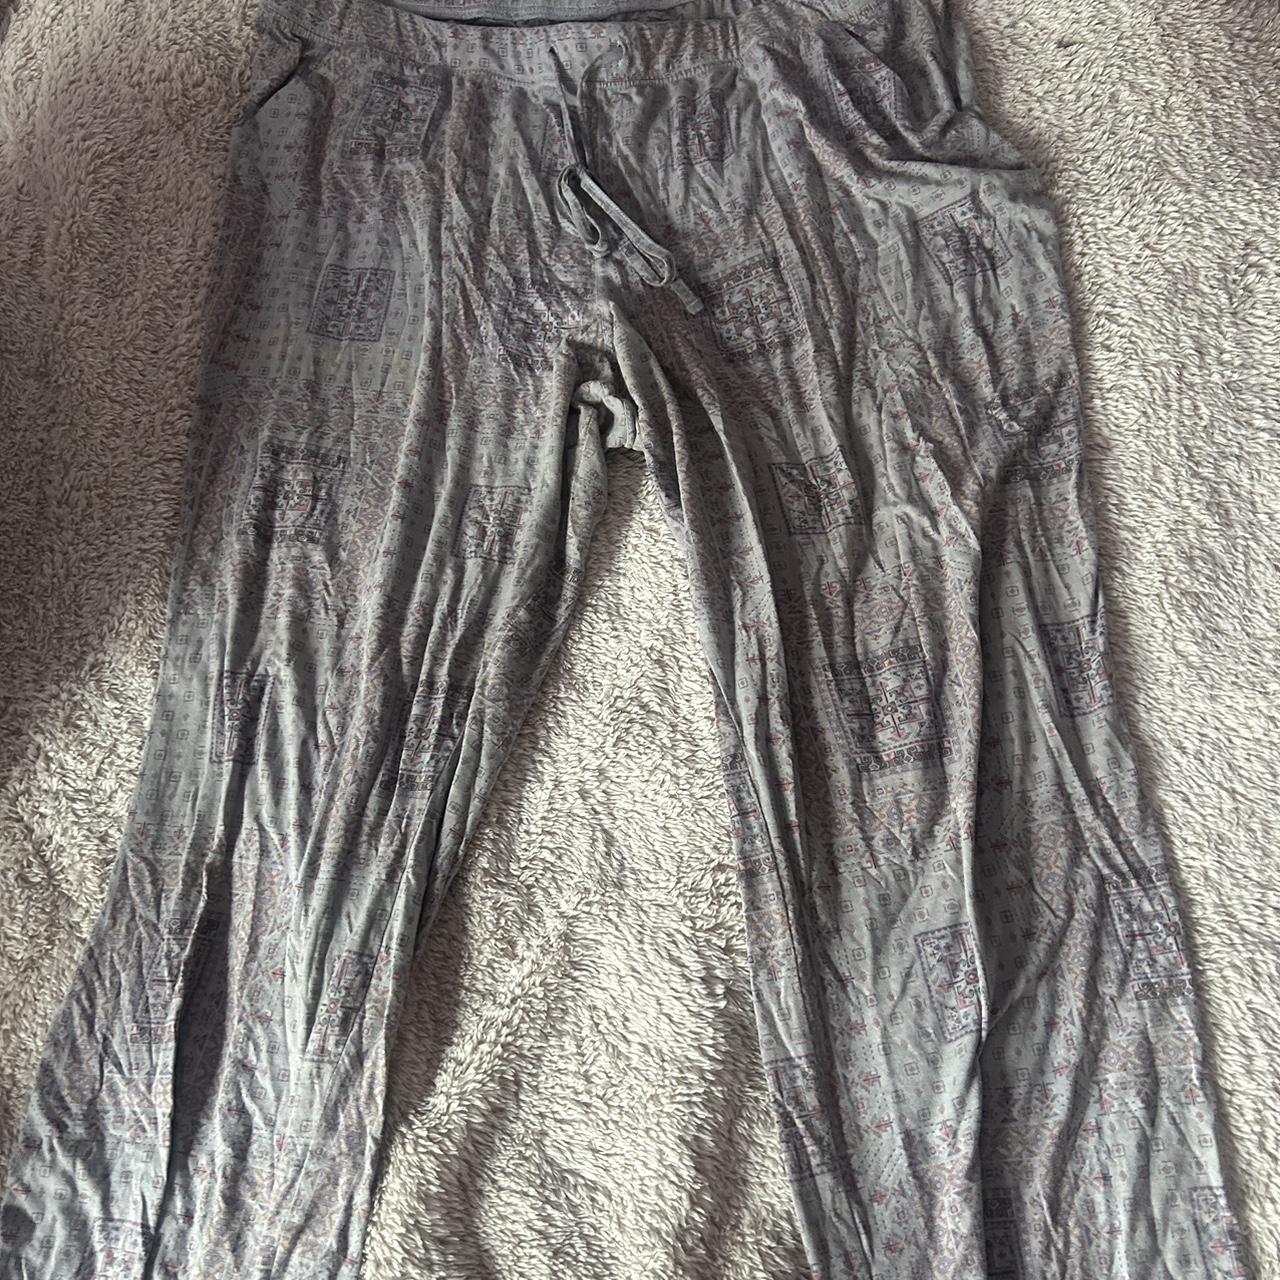 XXL comfy pajama pants from soma with cute print - Depop